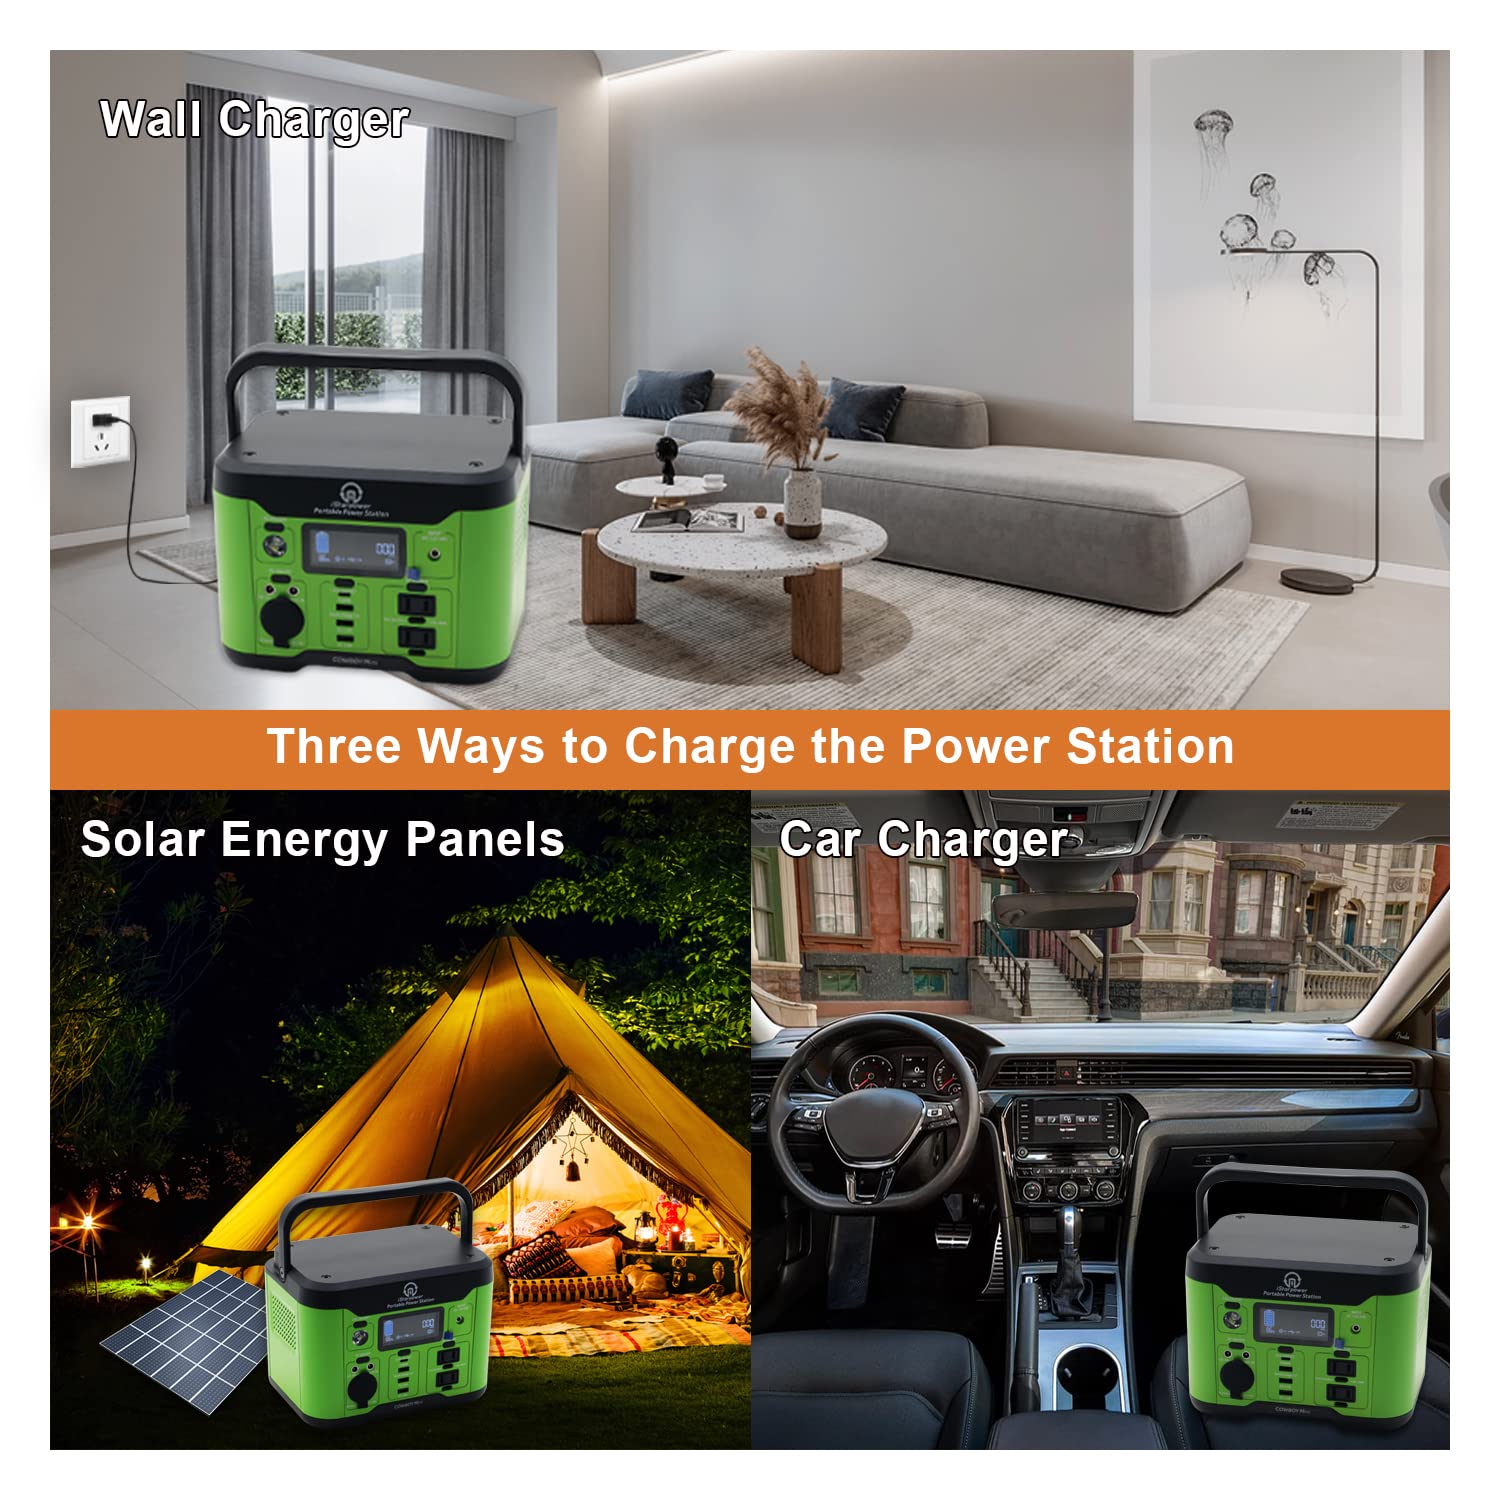 ISTARPOWER Portable Power Station 300W, Solar Generator, 296Wh LifePO4 Lithium Battery with 120V/300W AC Outlets, USB-C Port, Fast Charging Port, LED Light for Camping, RV, Emergency Backup